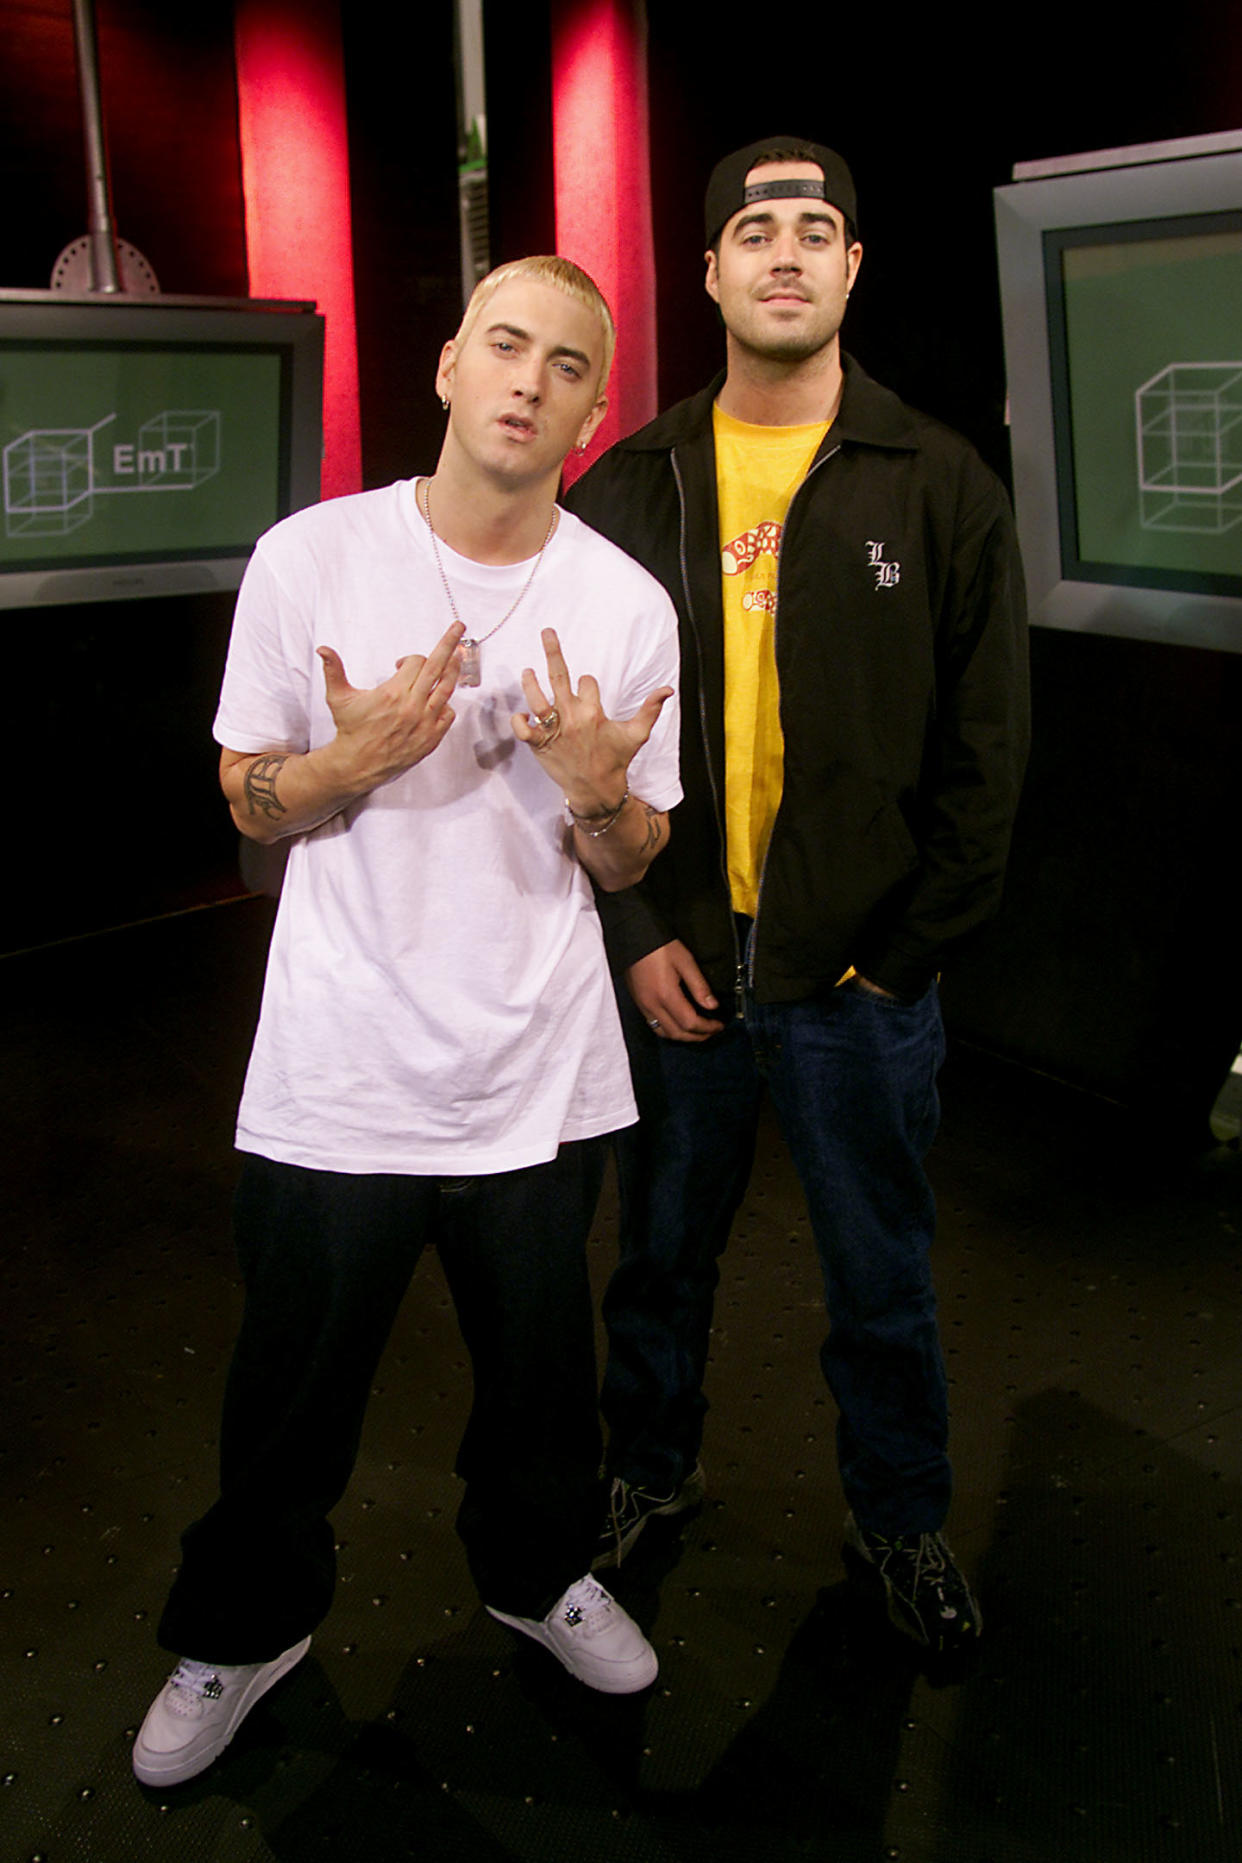 Eminem poses for a photo with Carson Daly on set of TRL at the MTV Studios in New York City on May 10, 2000.  Photo by Scott Gries/Getty Images